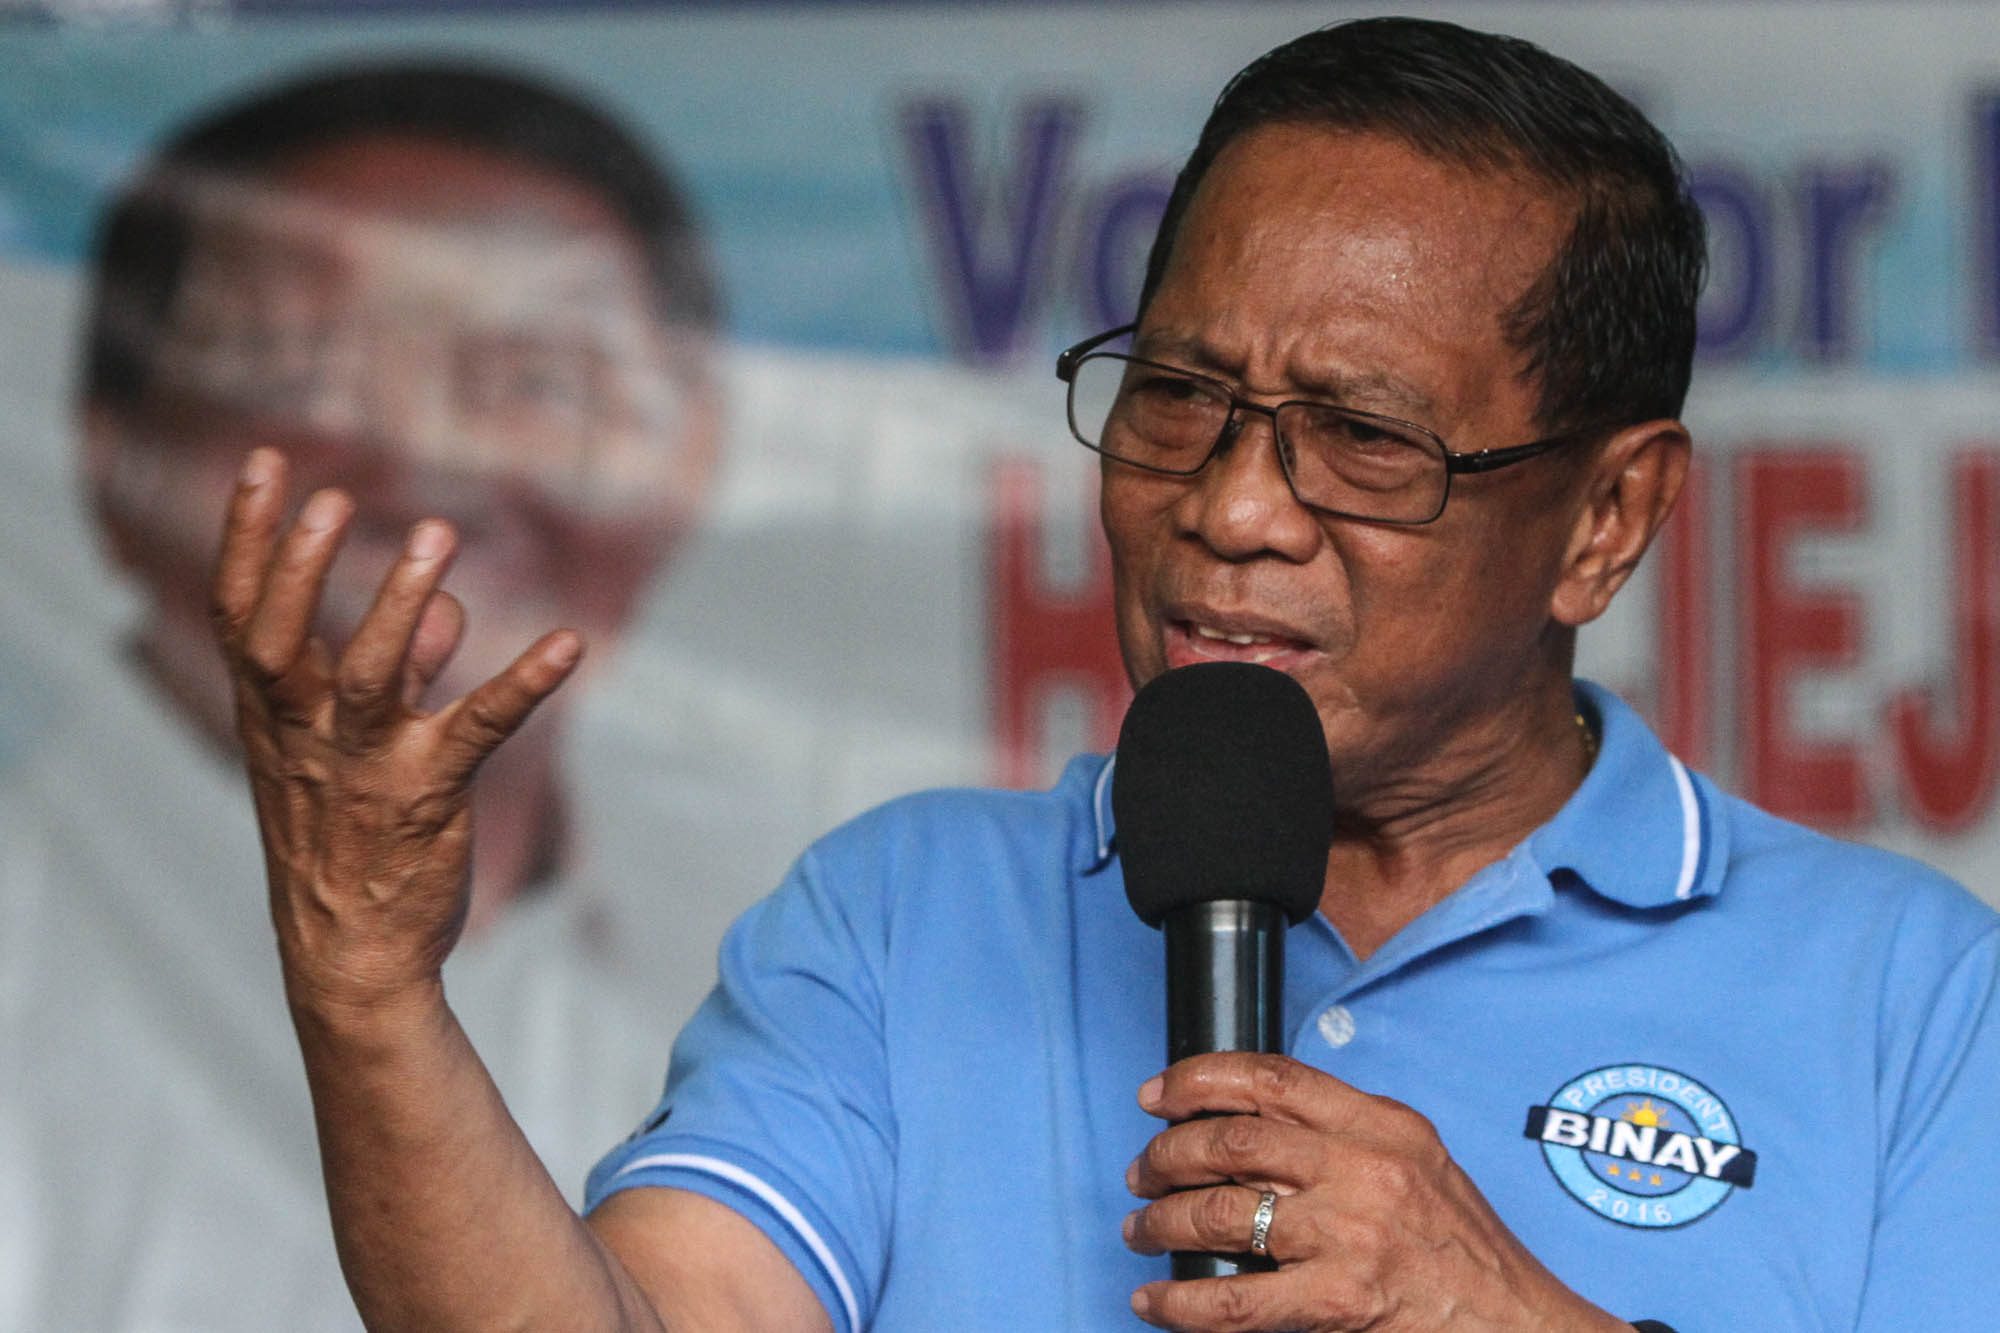 Binay ready to ‘throw all punches’ at presidential debate